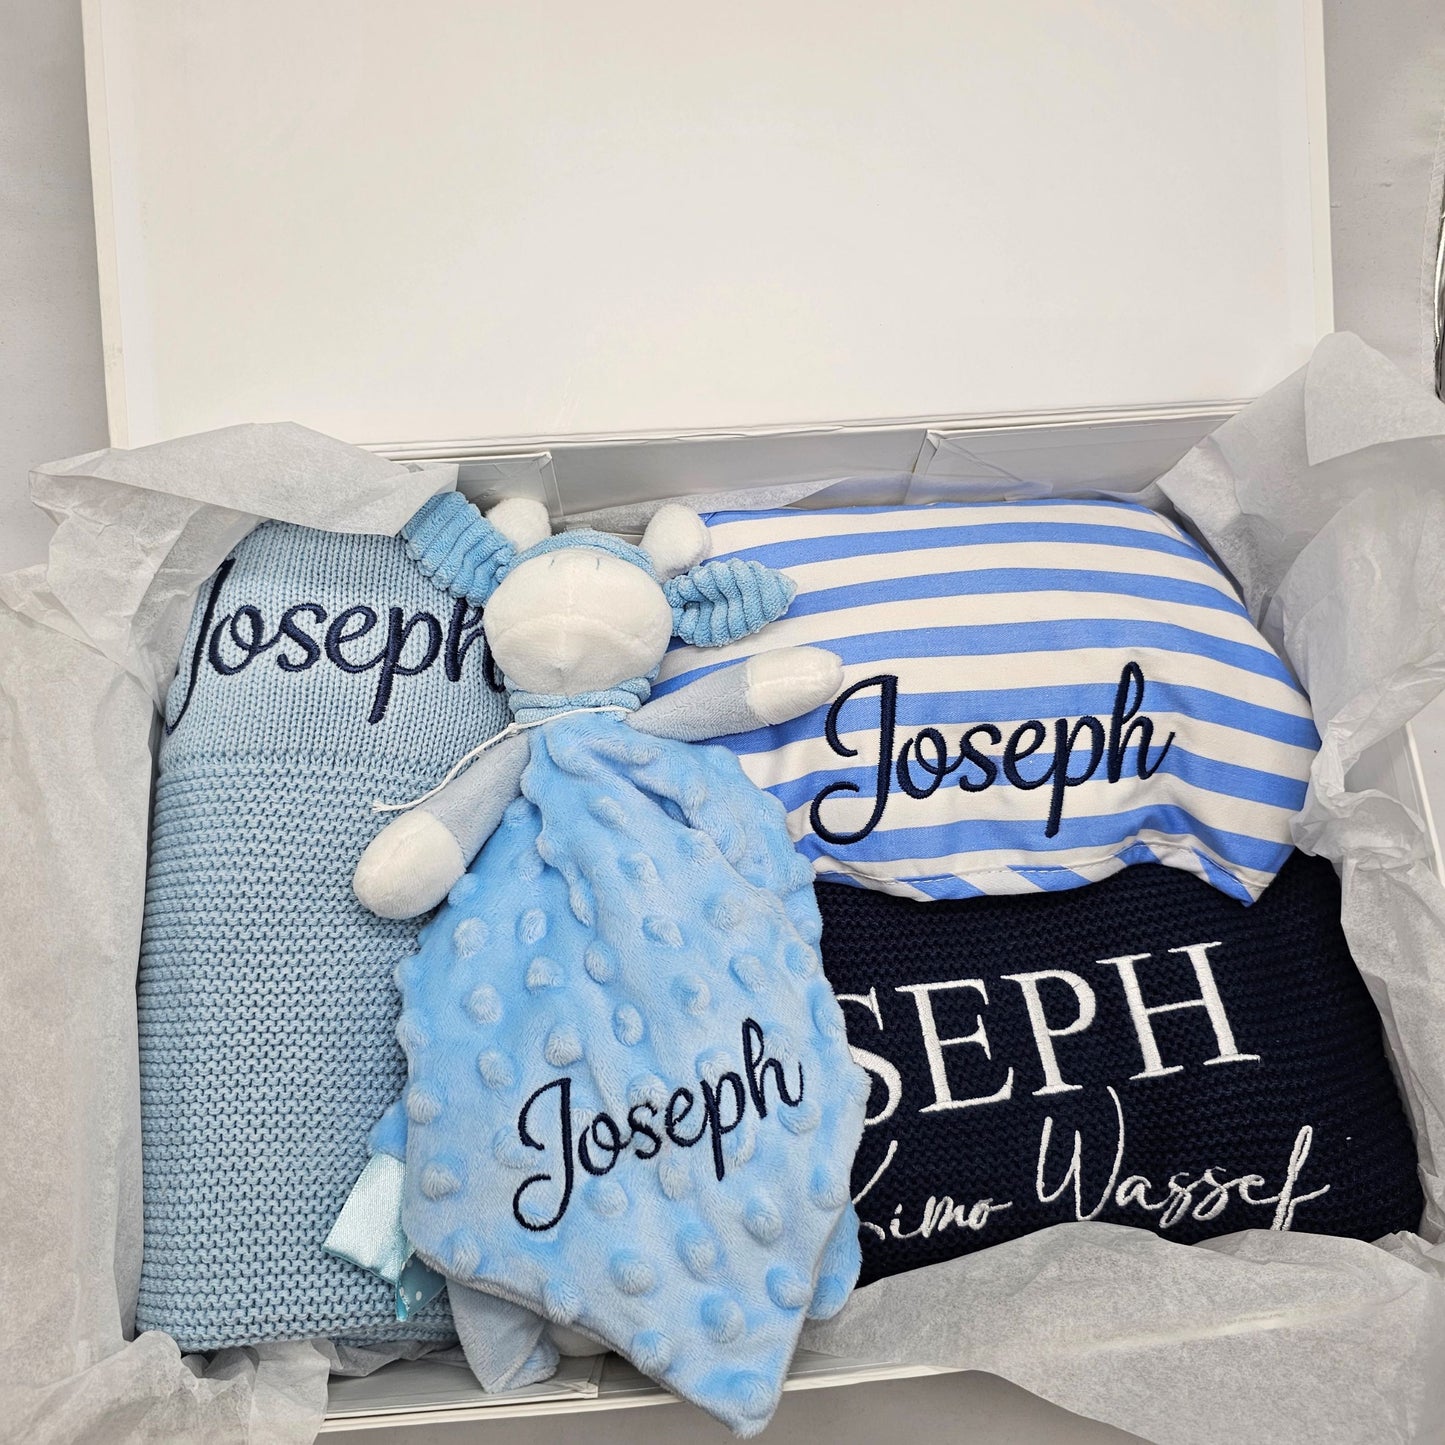 Gift box with blanket, towels, comforter personalised with embroidery